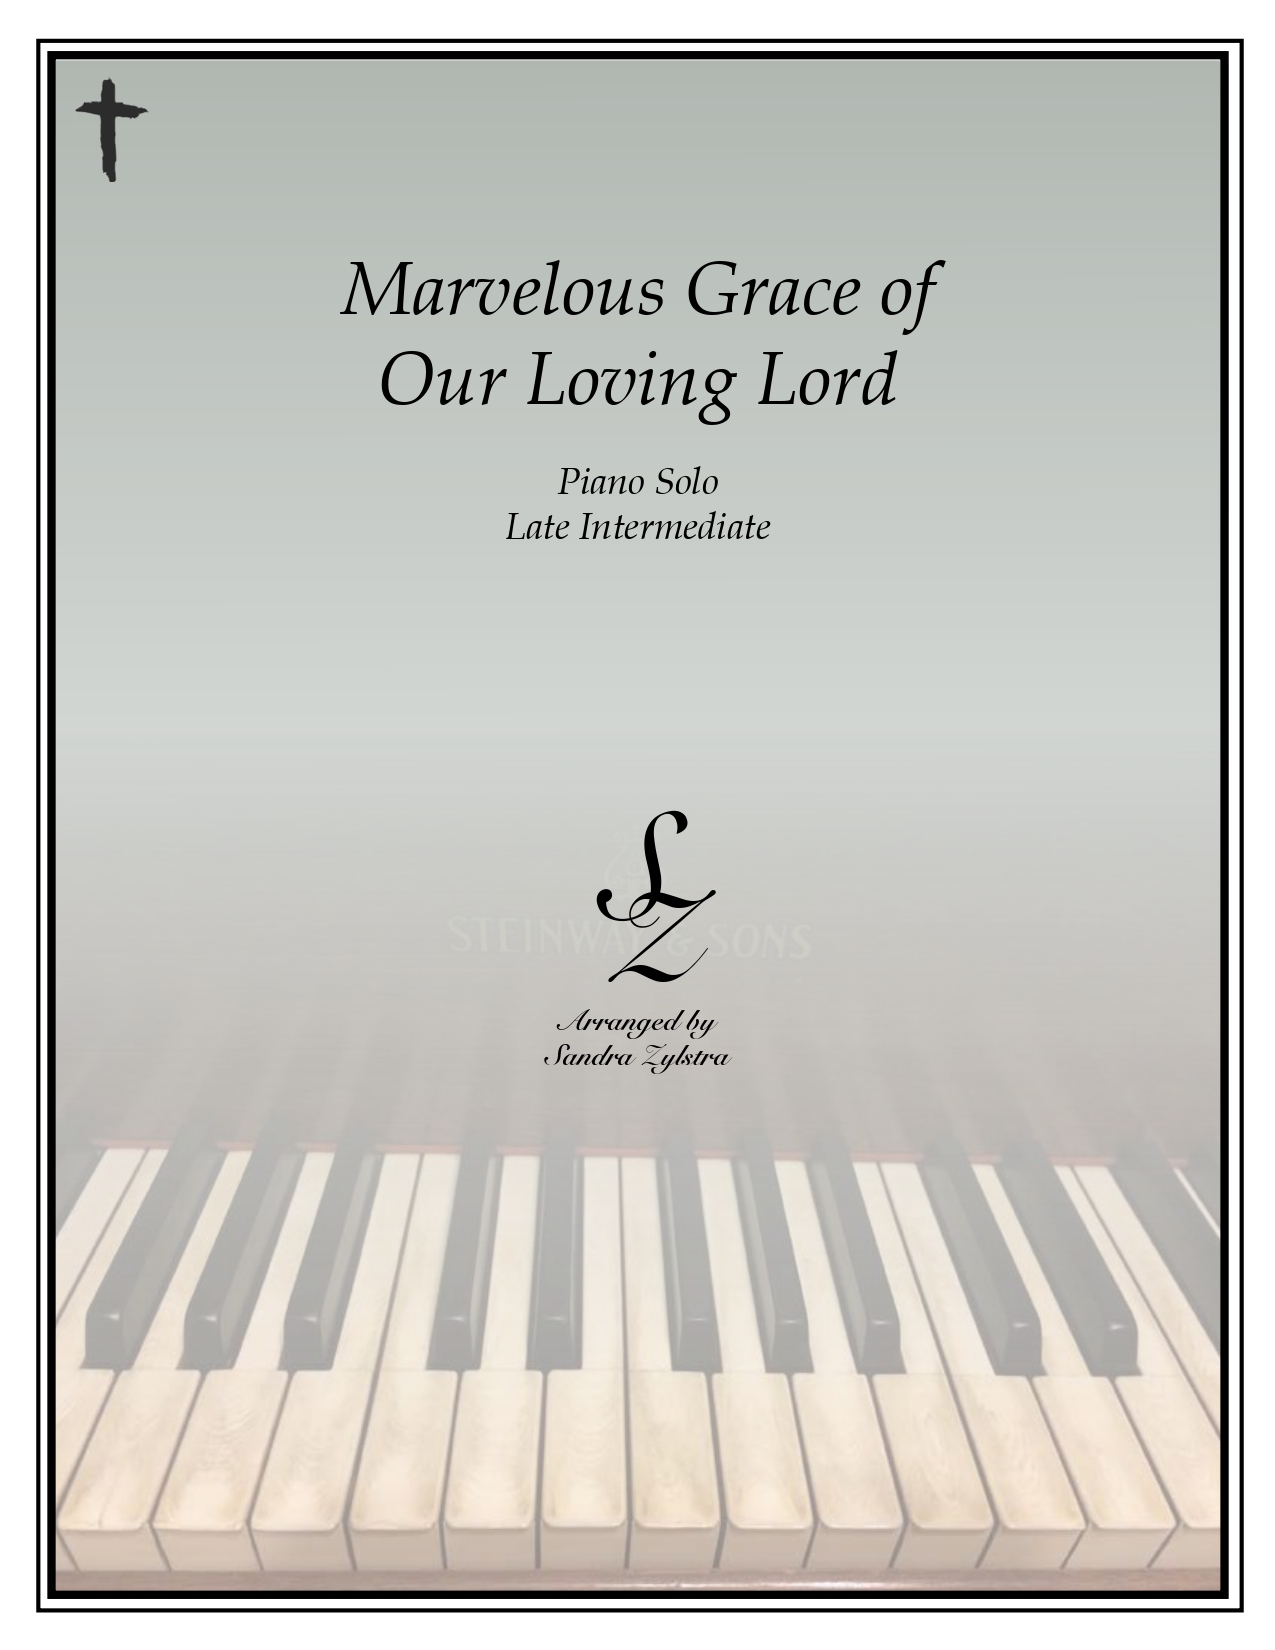 Marvelous Grace Of Our Loving Lord late intermediate piano cover page 00011